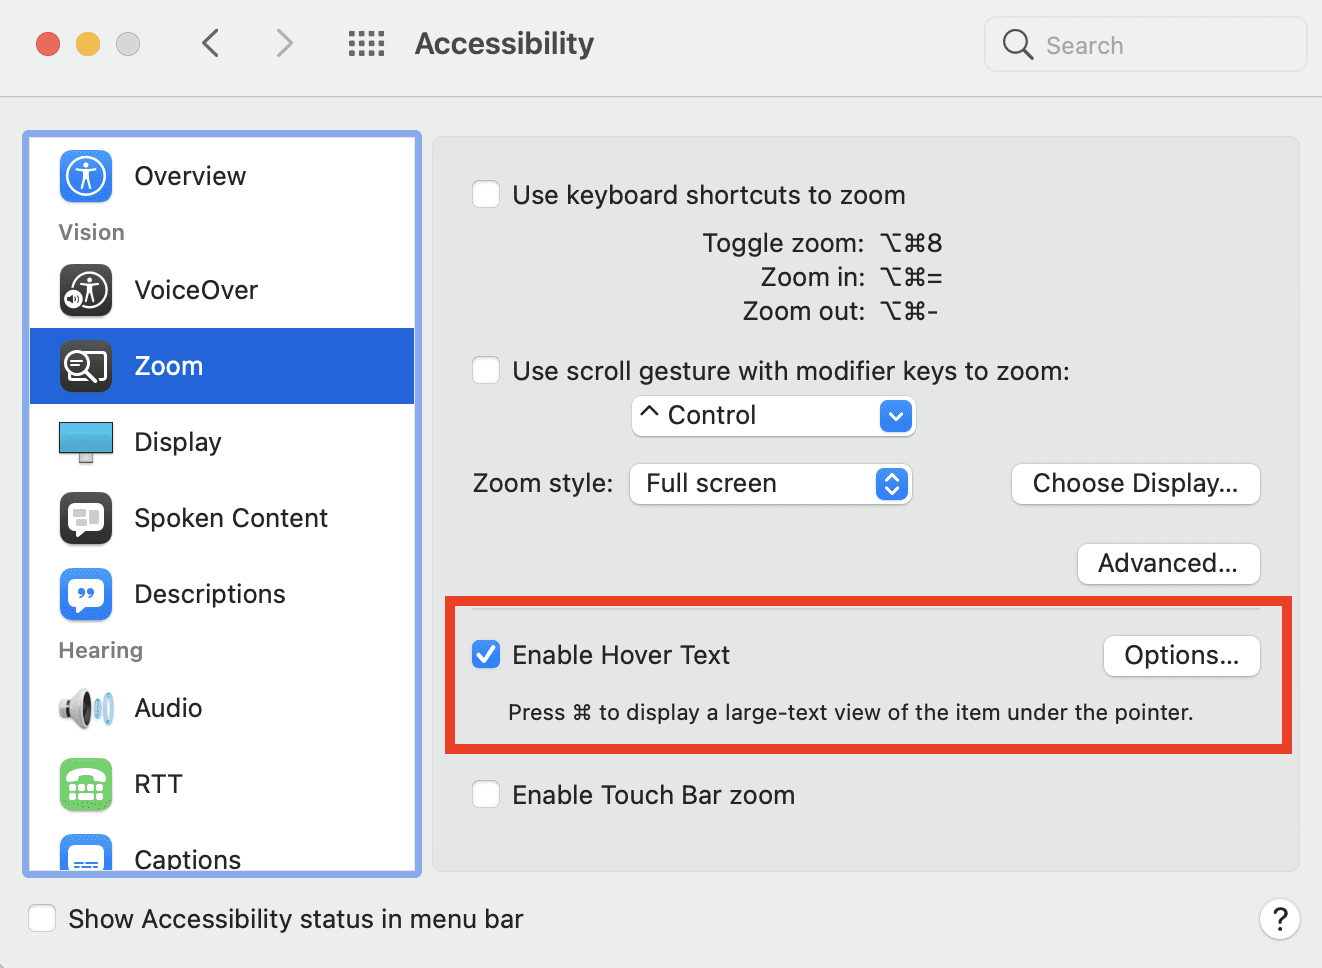 Hover Text is found in System Preferences > Accessibility > Zoom